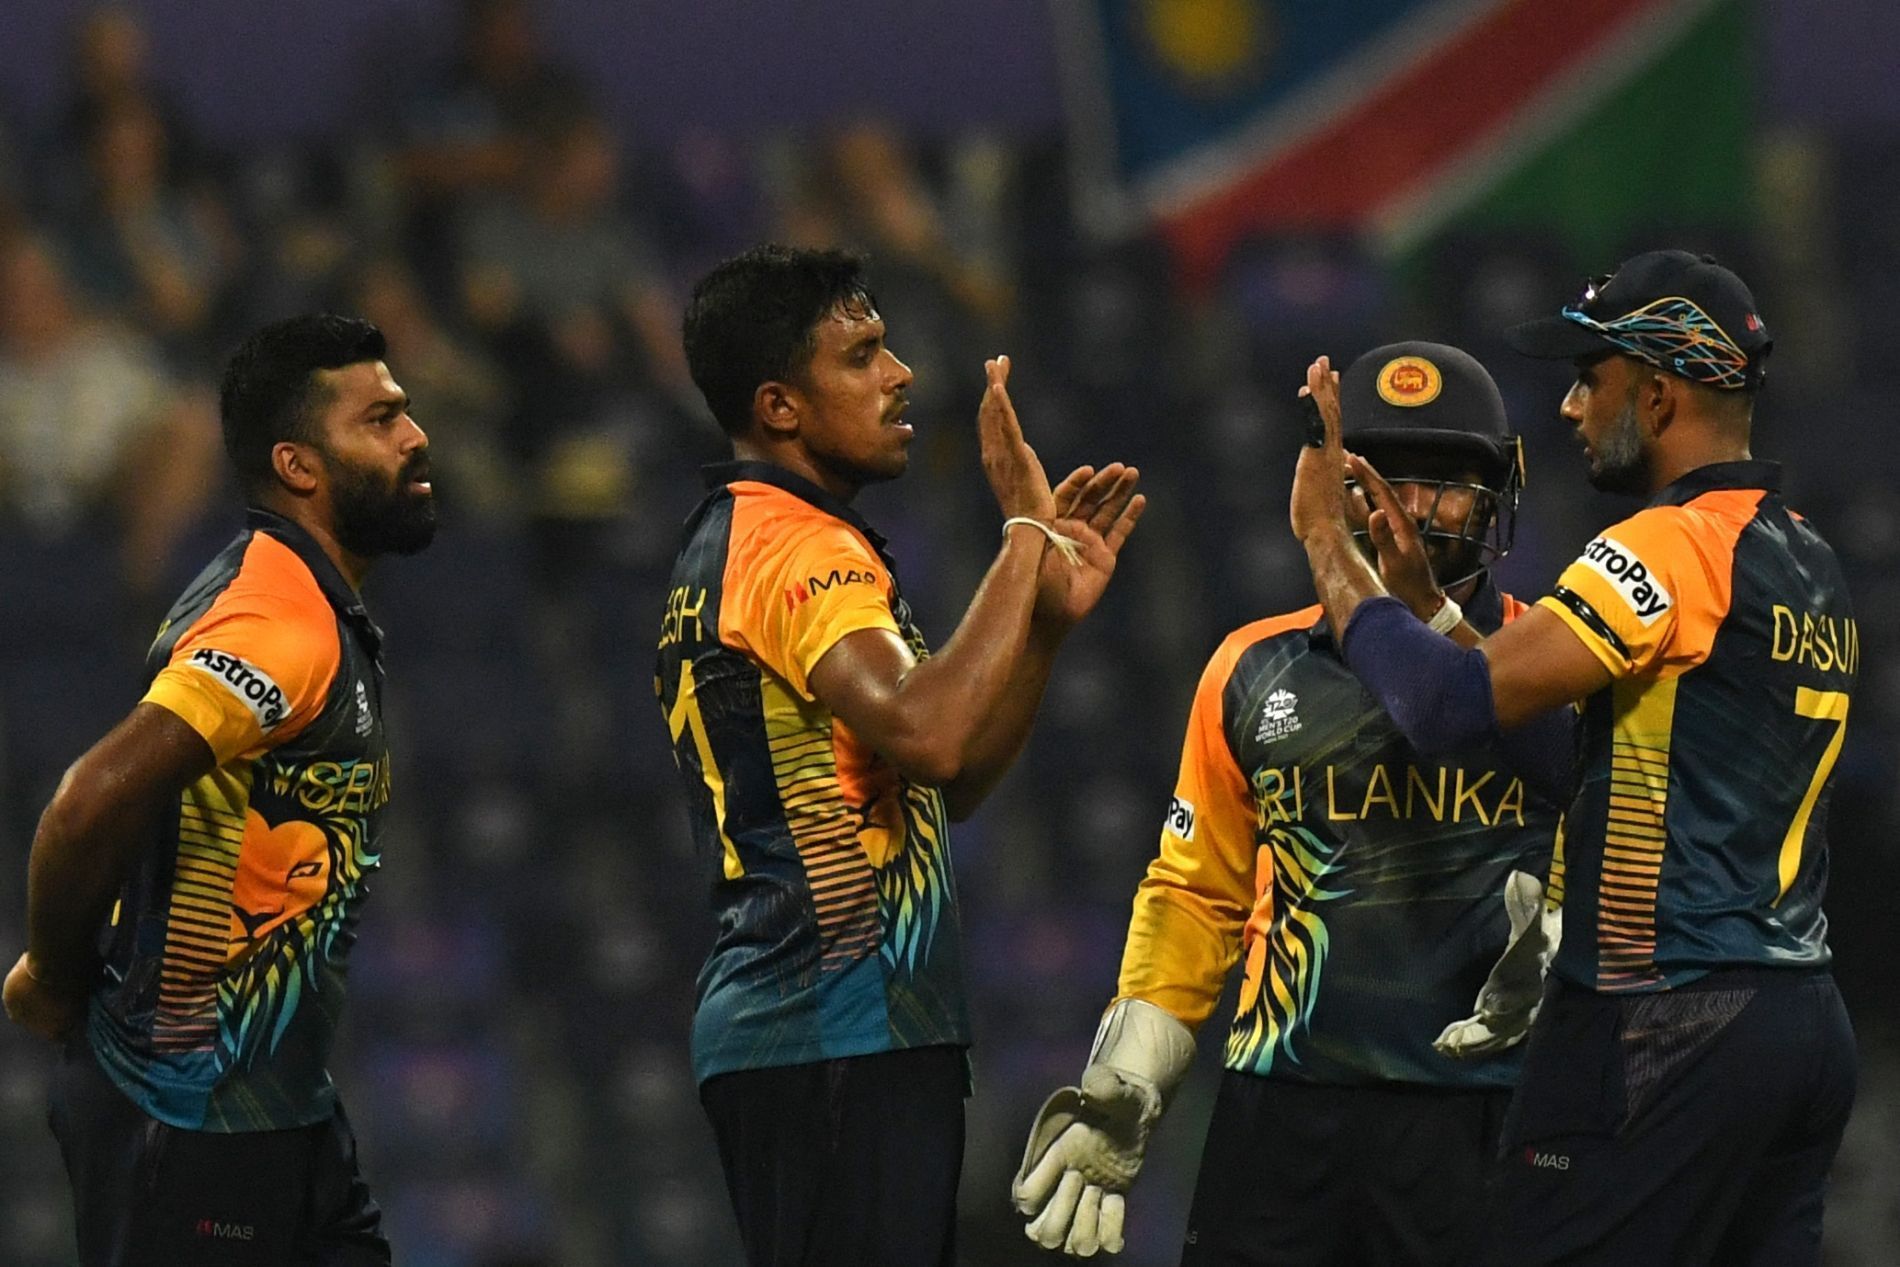 Sri Lankan cricketers celebrate a wicket. Pic: T20WorldCup/ Twitter